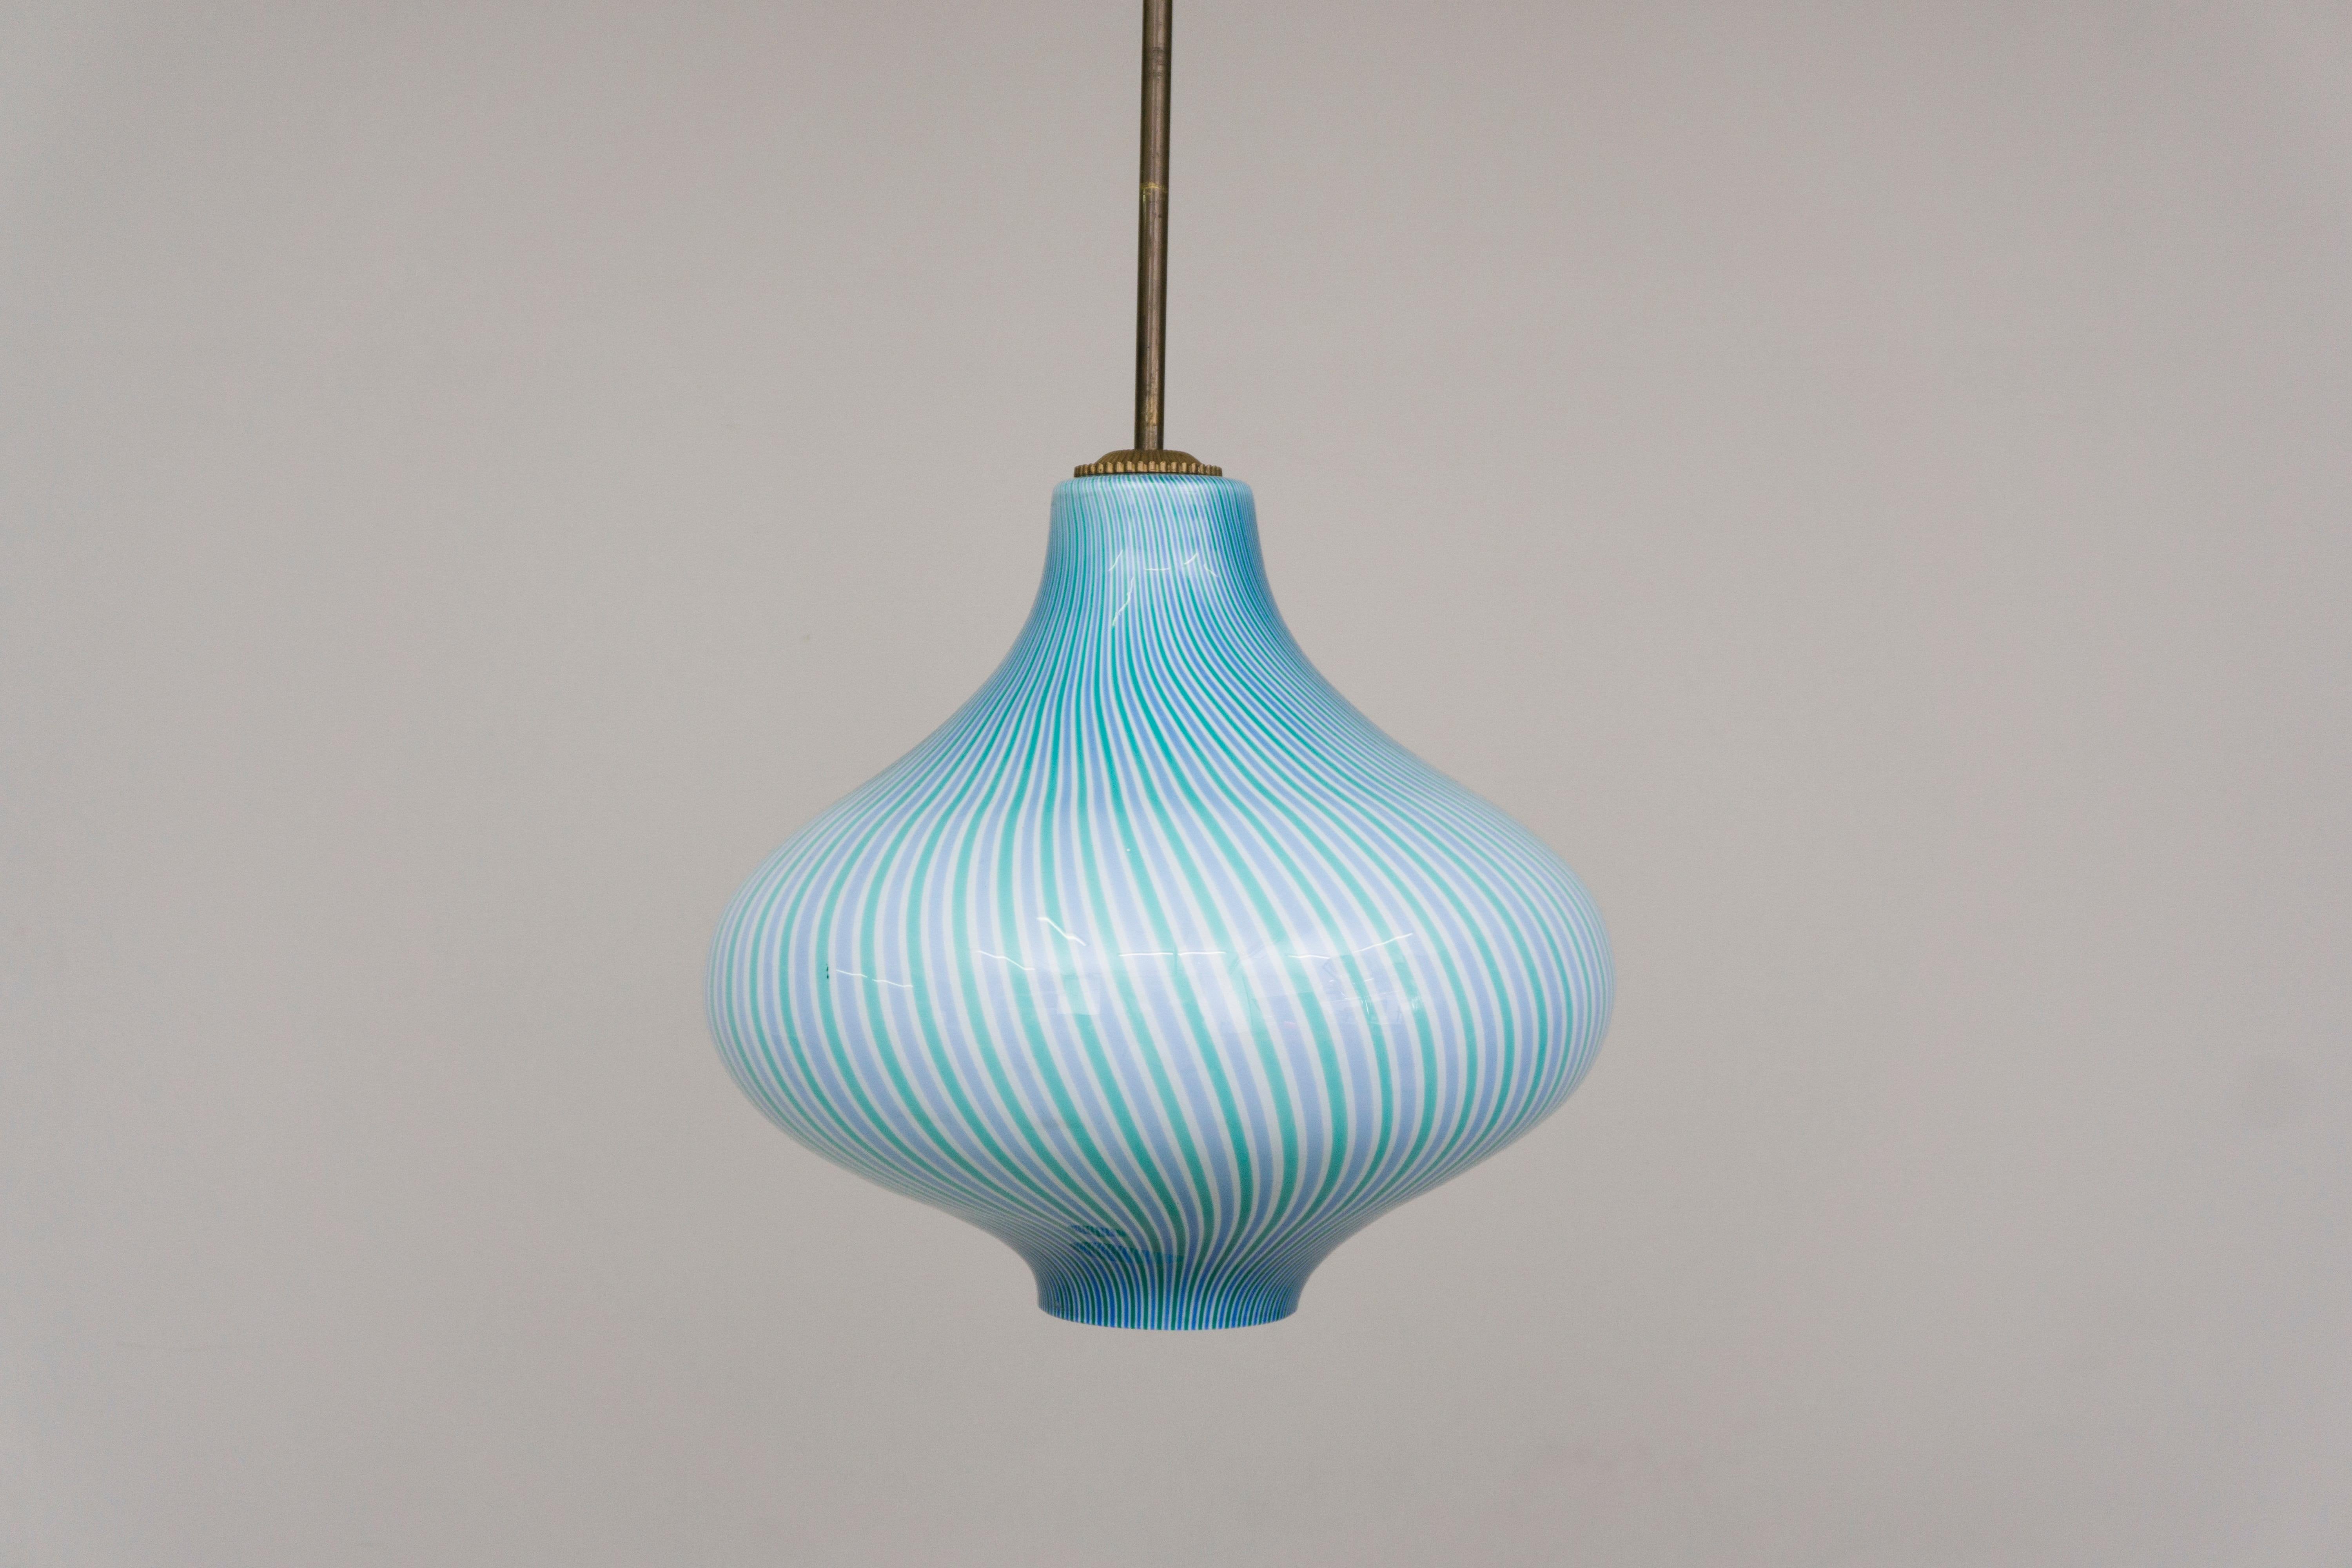 This bounteous pendant made of Murano glass has a unique flashed glass in a coloring in green and light blue which crate a beautiful glow when lit. The detailed yet minimal mounting is made of brass. Designed by Massimo Vignelli

Massimo Vignelli